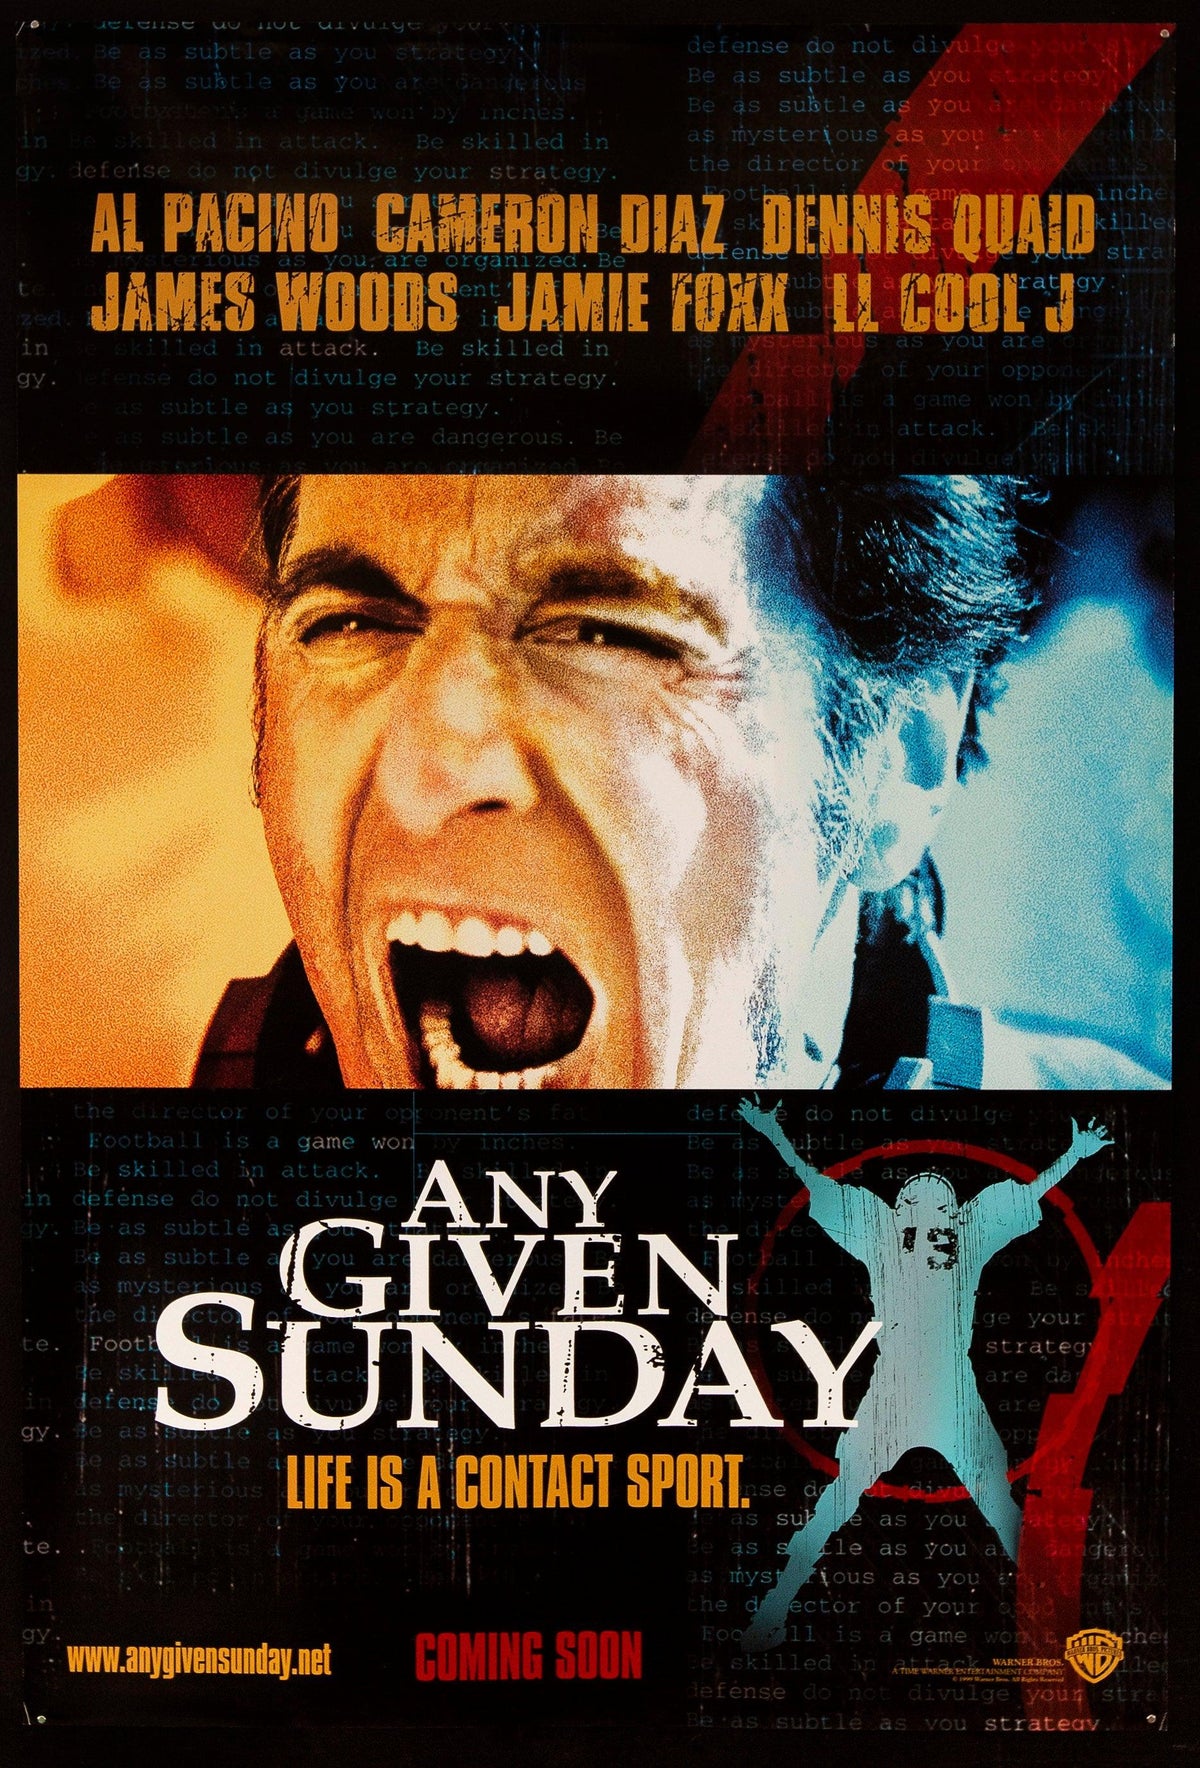 Any Given Sunday 1 Sheet (27x41) Original Vintage Movie Poster